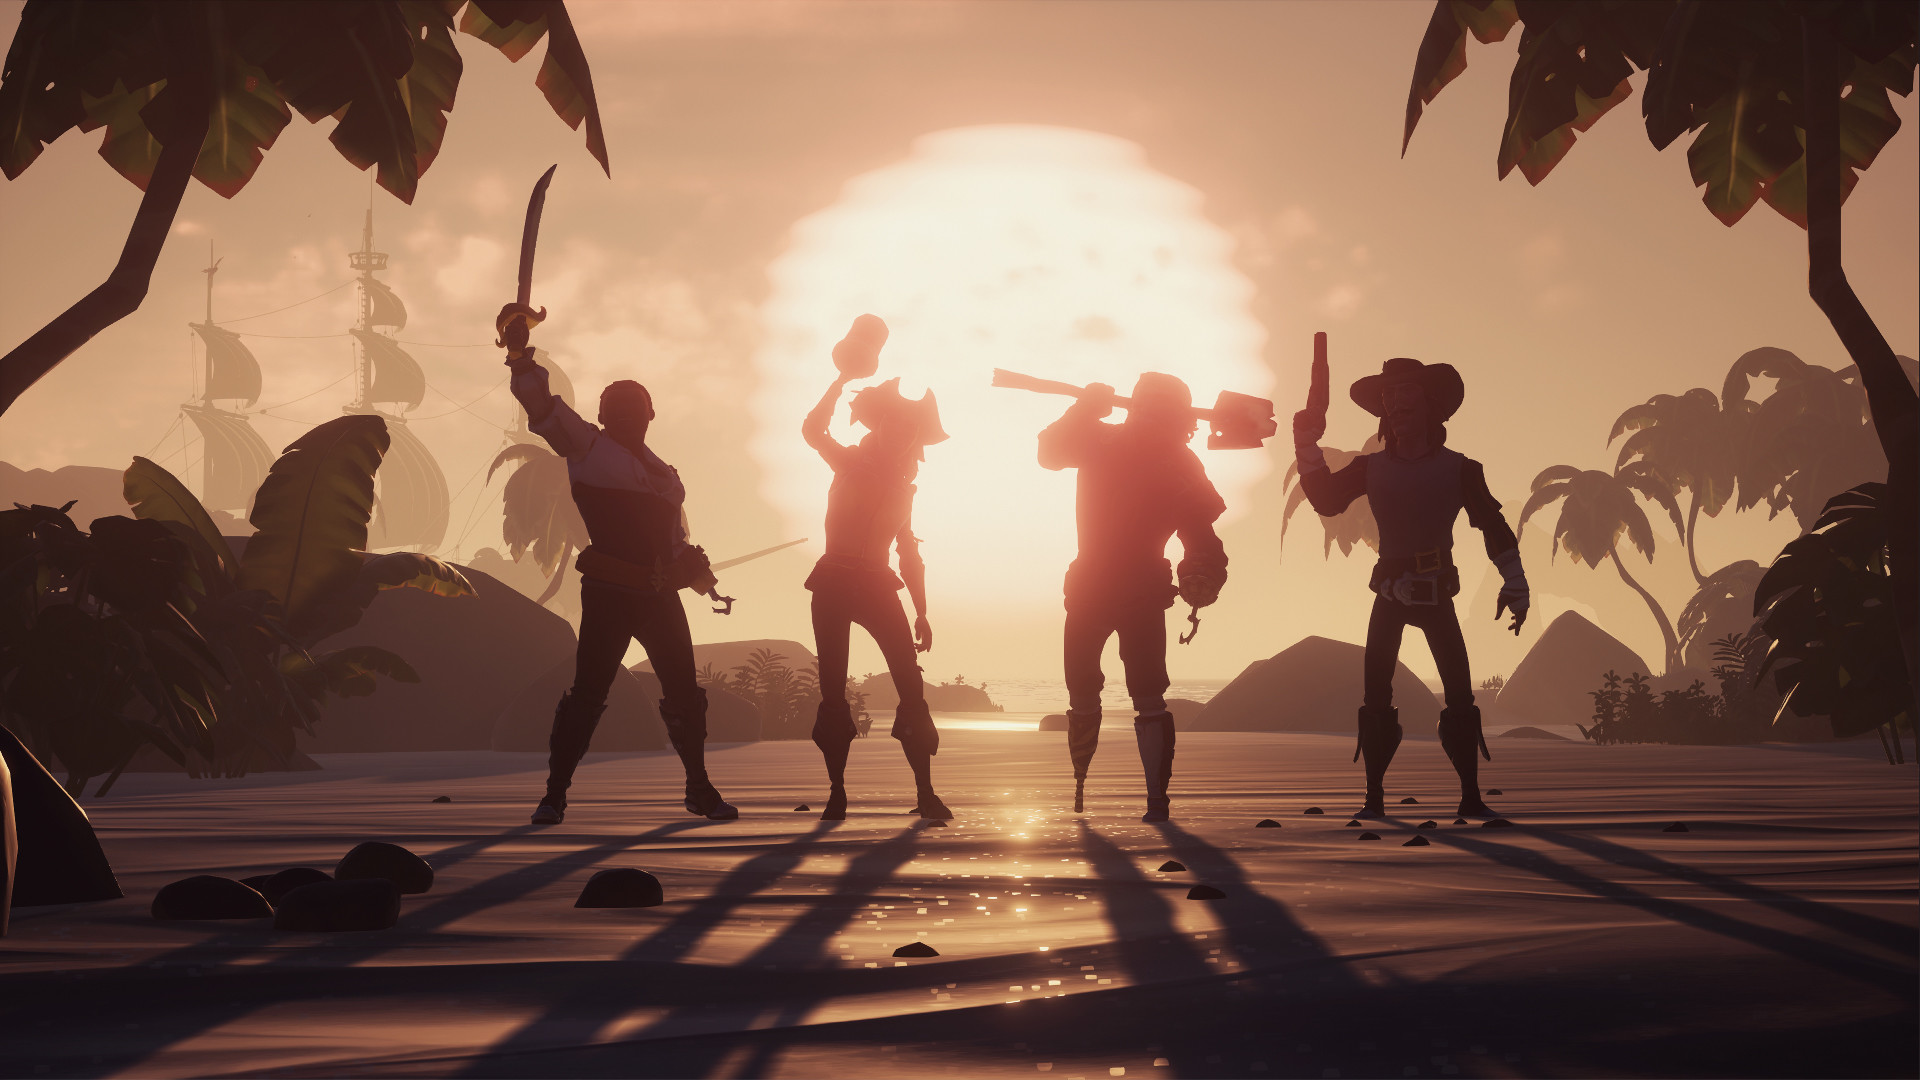 Sea of Thieves Passes 15 Million Players Since Release